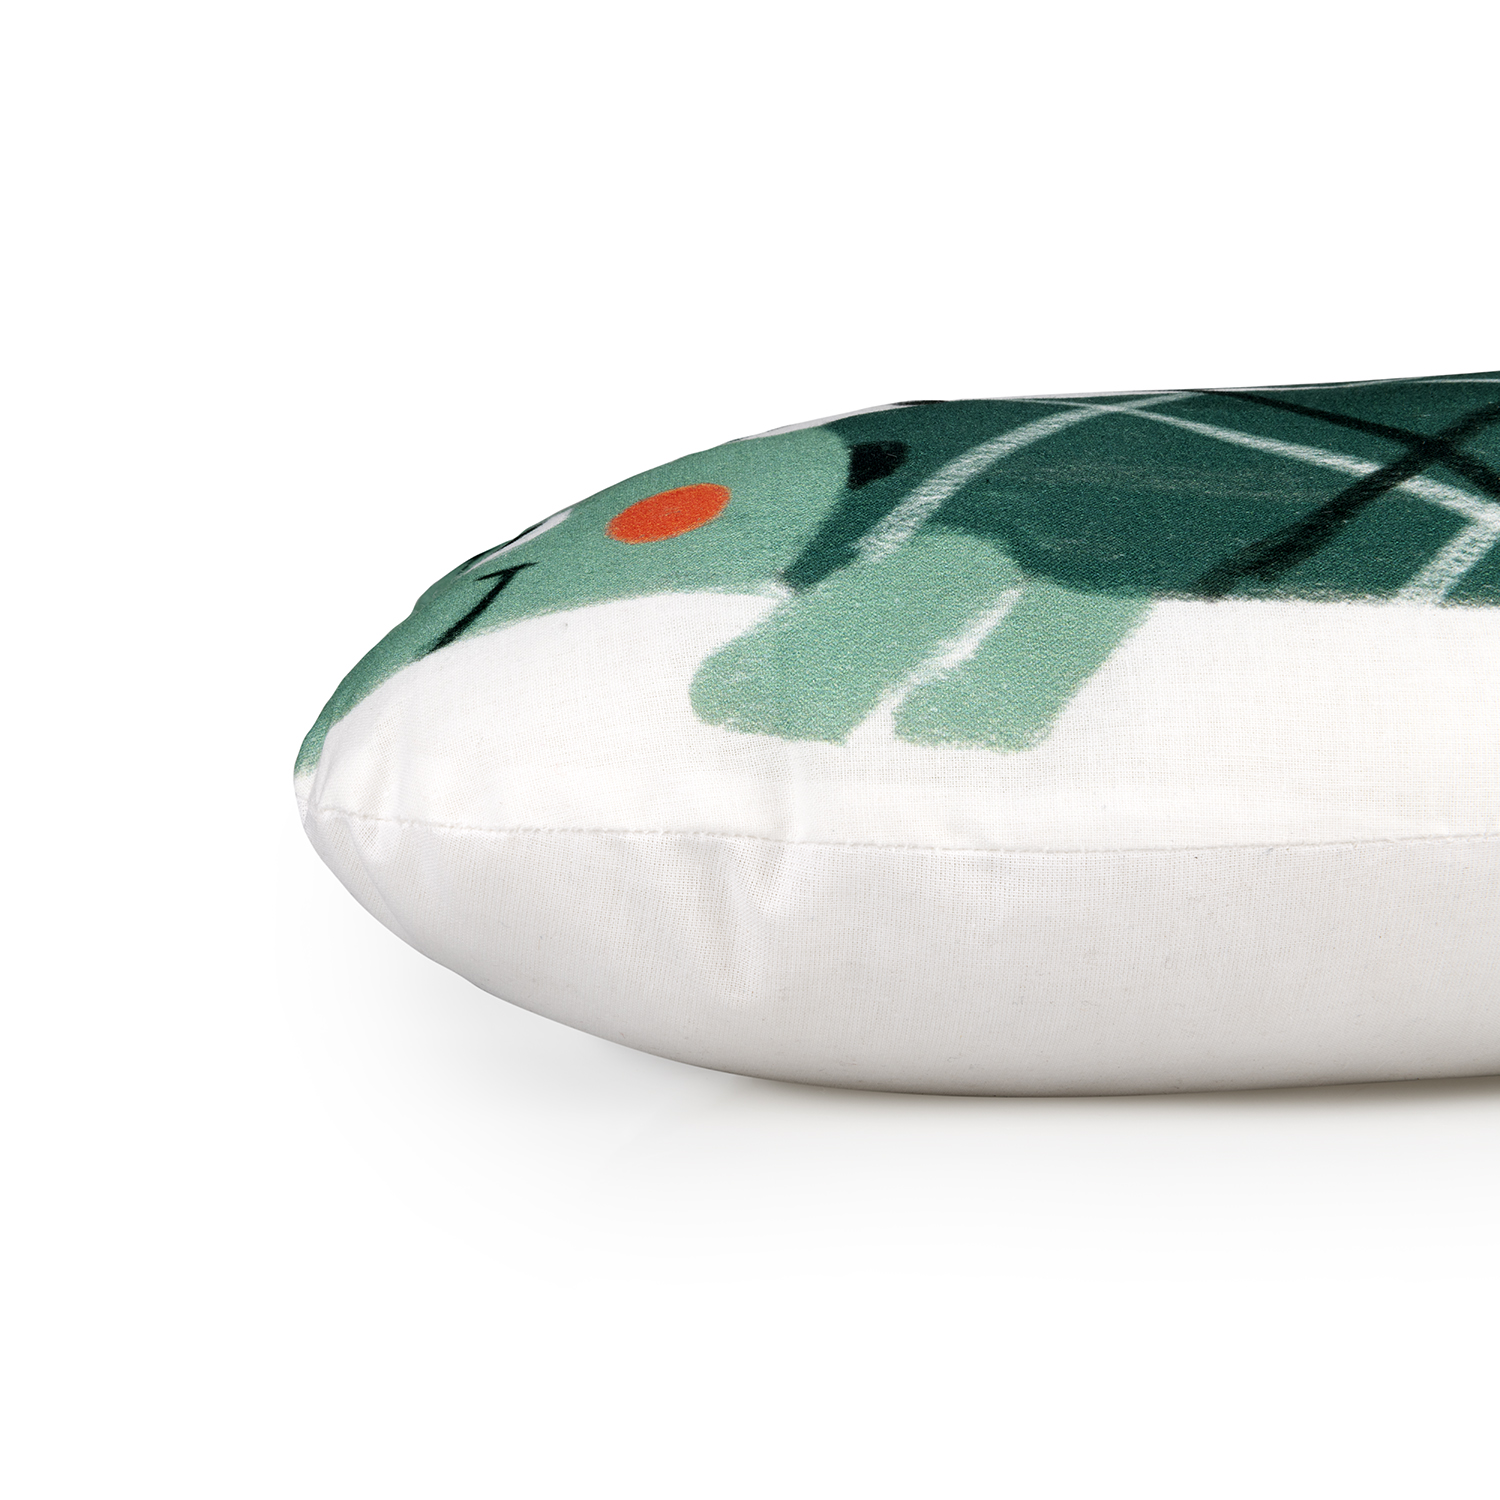 playful turtle shaped cushion by GironesHome